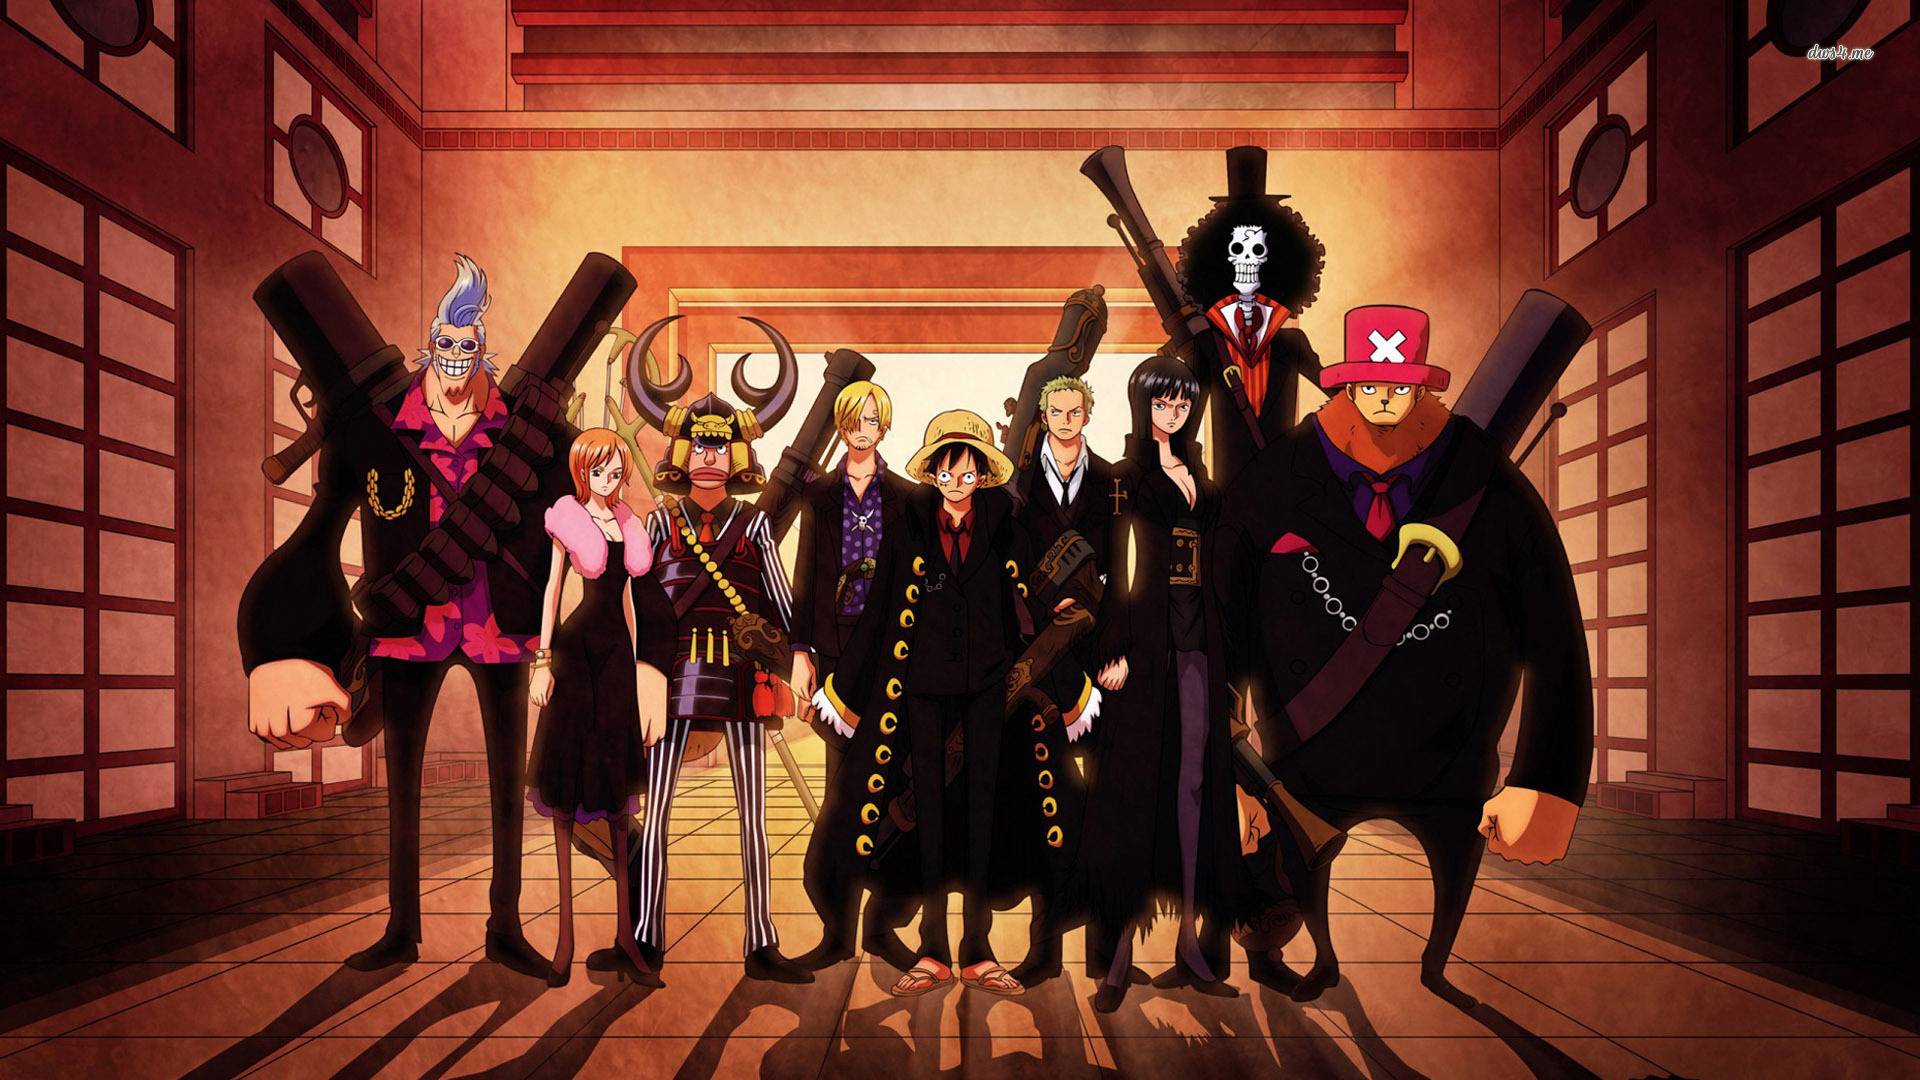 One Piece the crew   One Piece Wallpaper